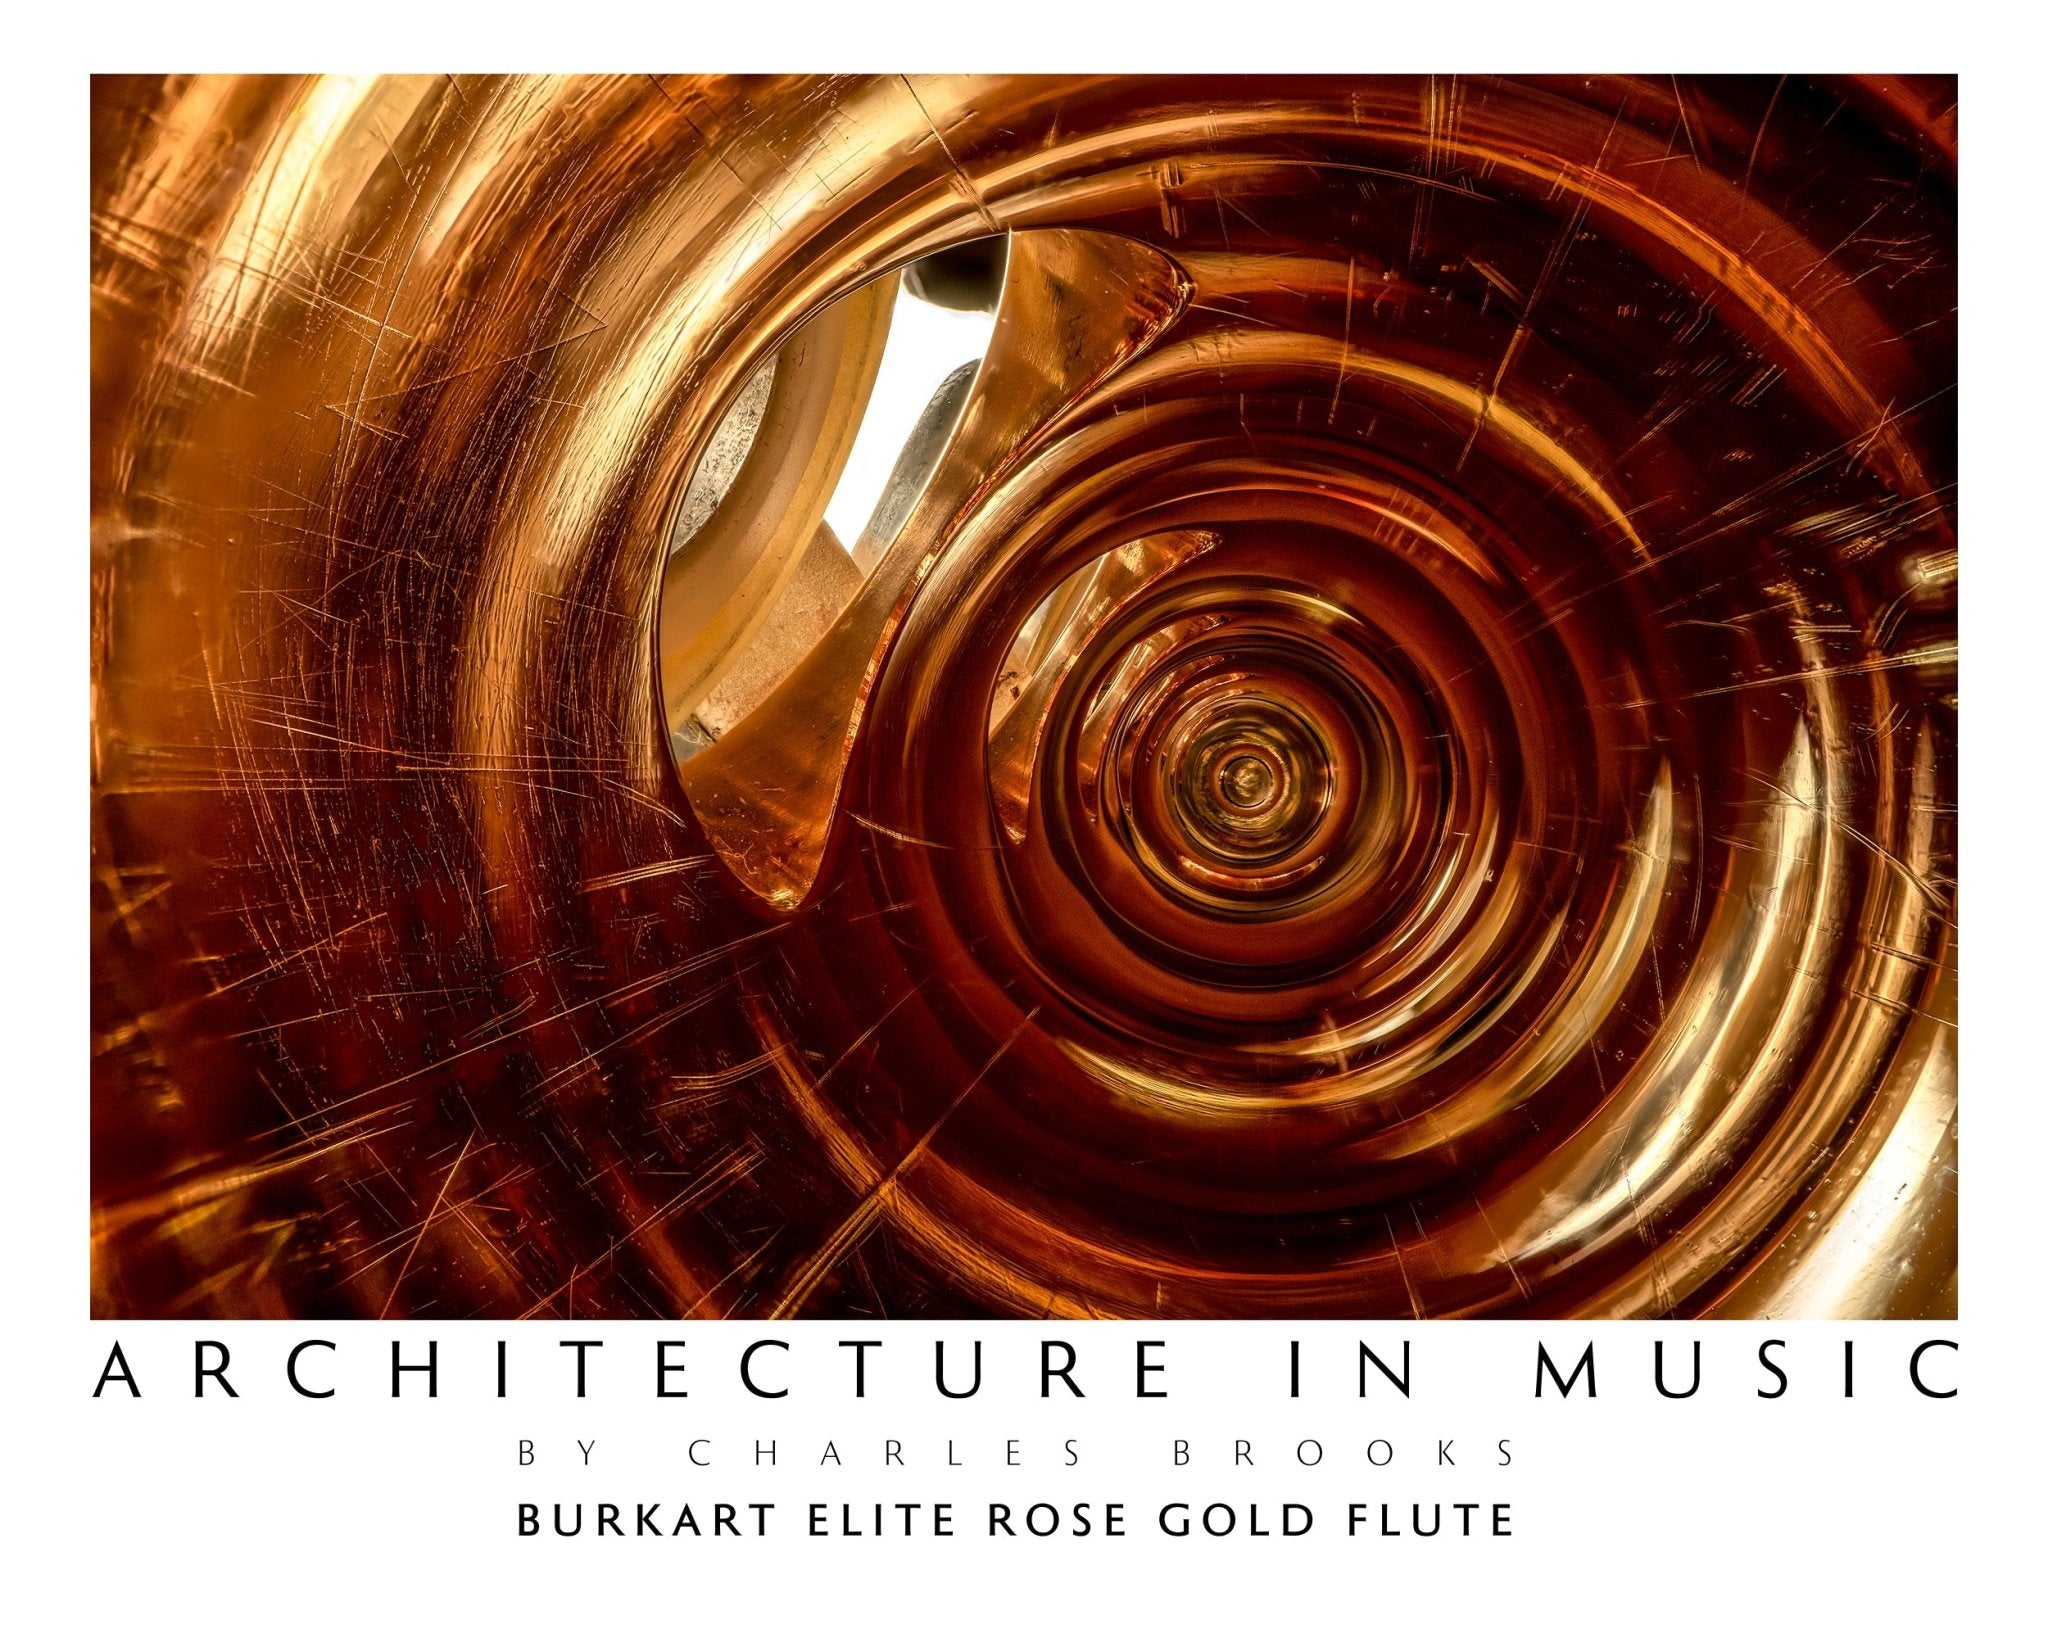 Photo of 14k Burkart Elite Rose Gold Flute. High Quality Poster. - Giclée Poster Print - Architecture In Music